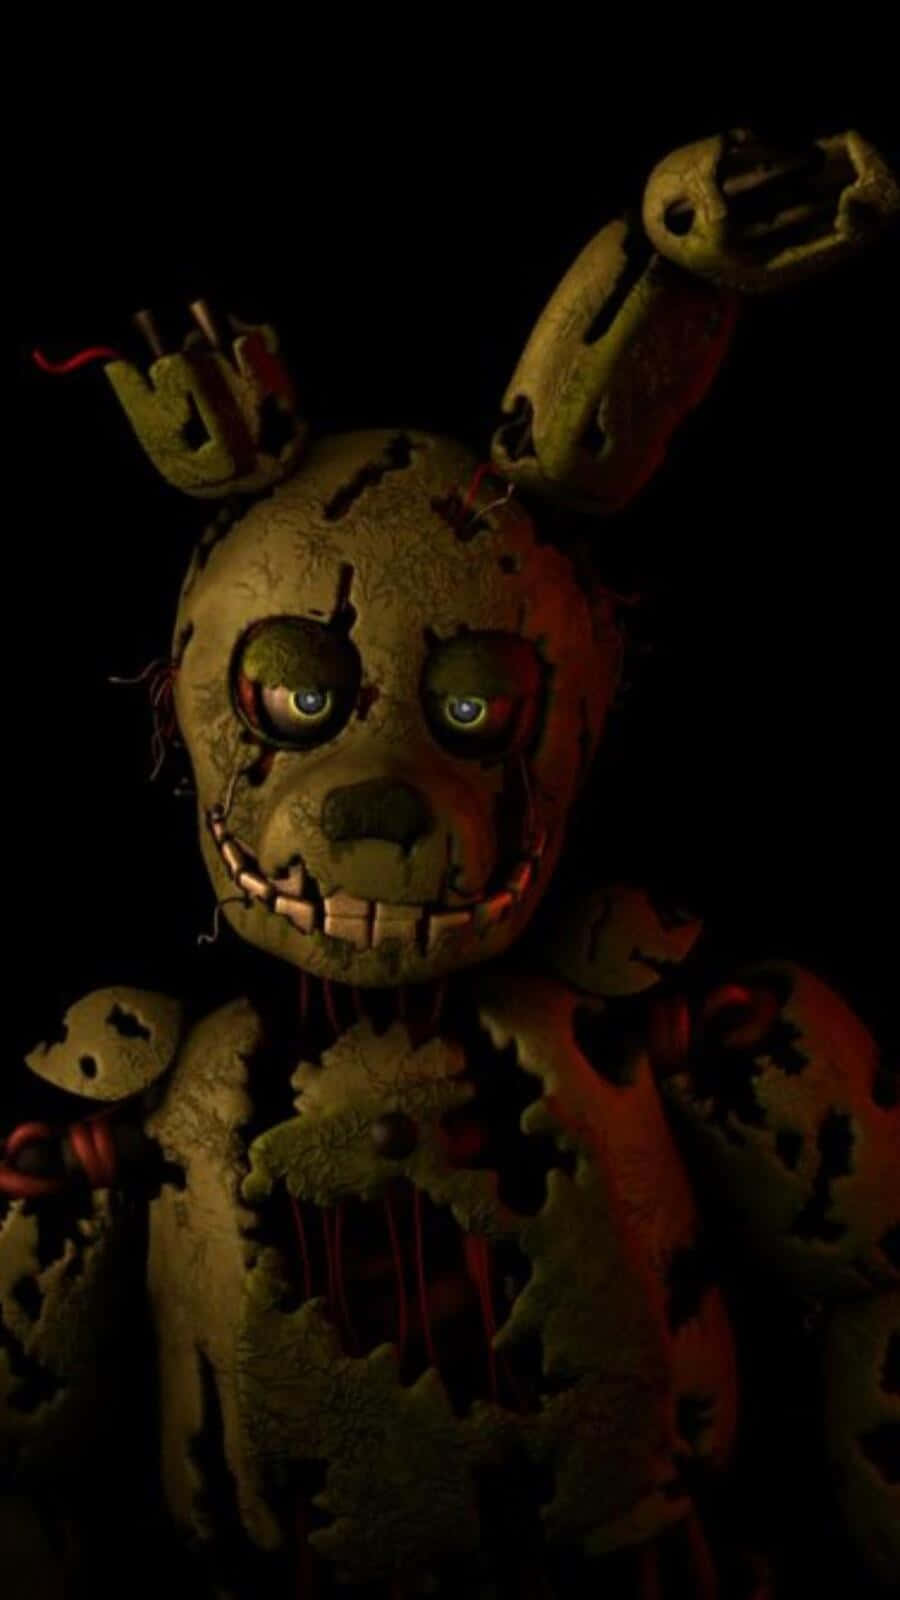 Creepy Springtrap staring into the void Wallpaper